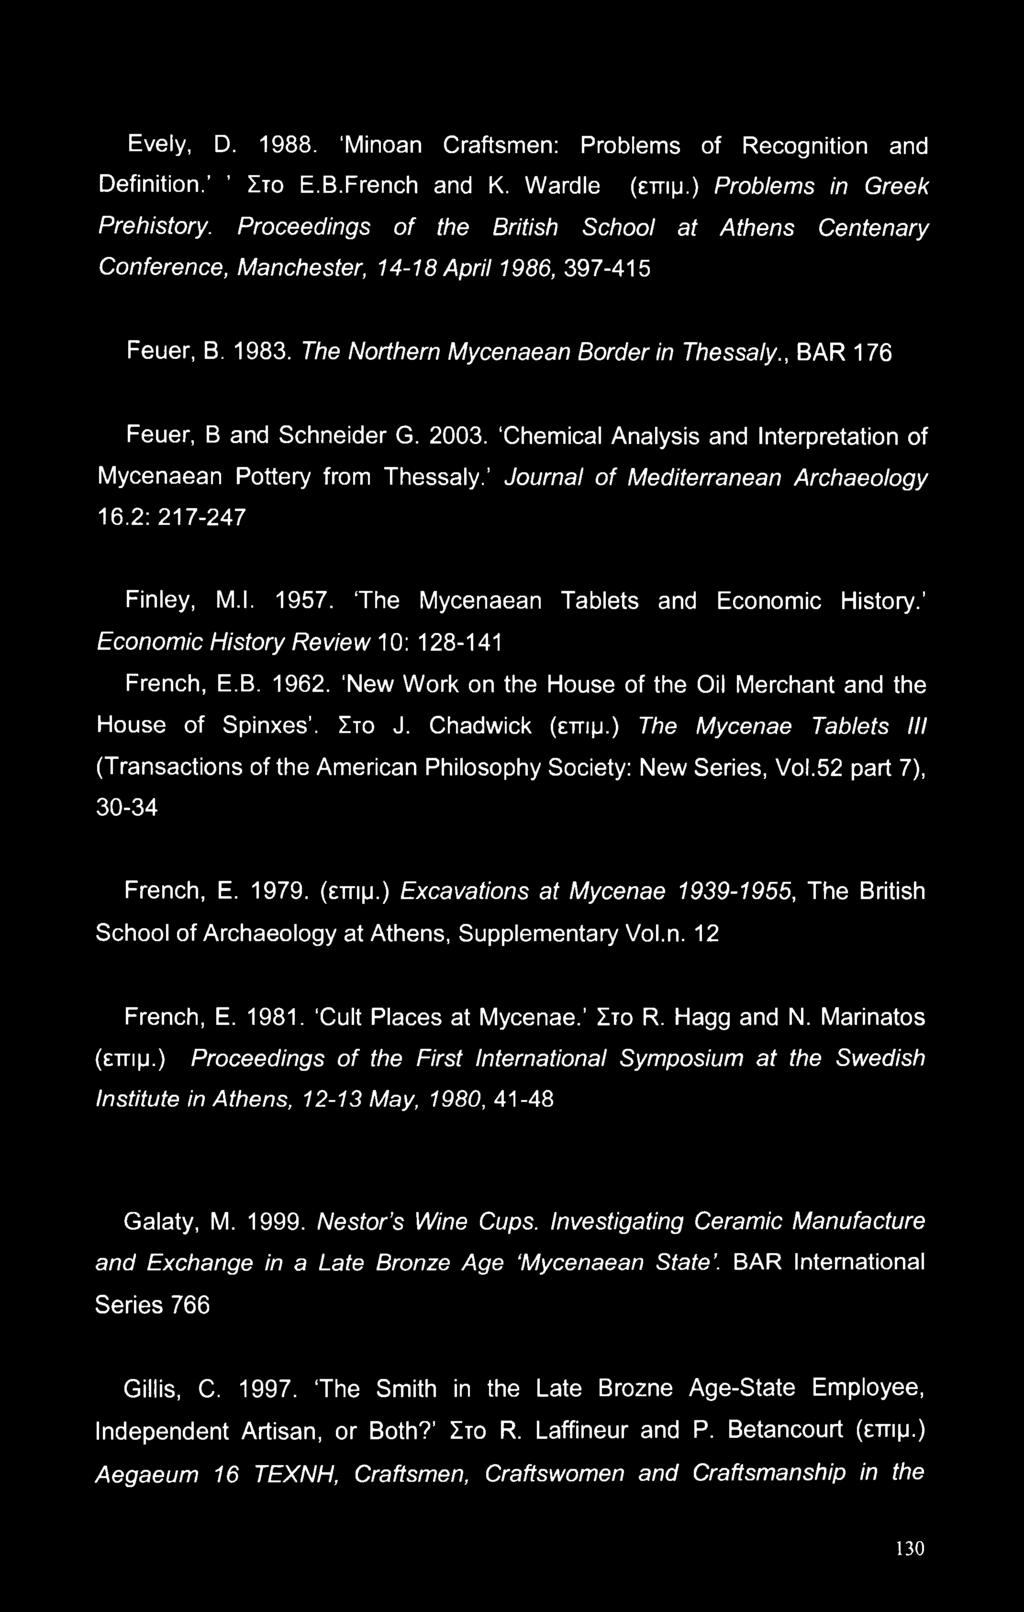 2003. Chemical Analysis and Interpretation of Mycenaean Pottery from Thessaly. Journal of Mediterranean Archaeology 16.2: 217-247 Finley, M.l. 1957. The Mycenaean Tablets and Economic History.